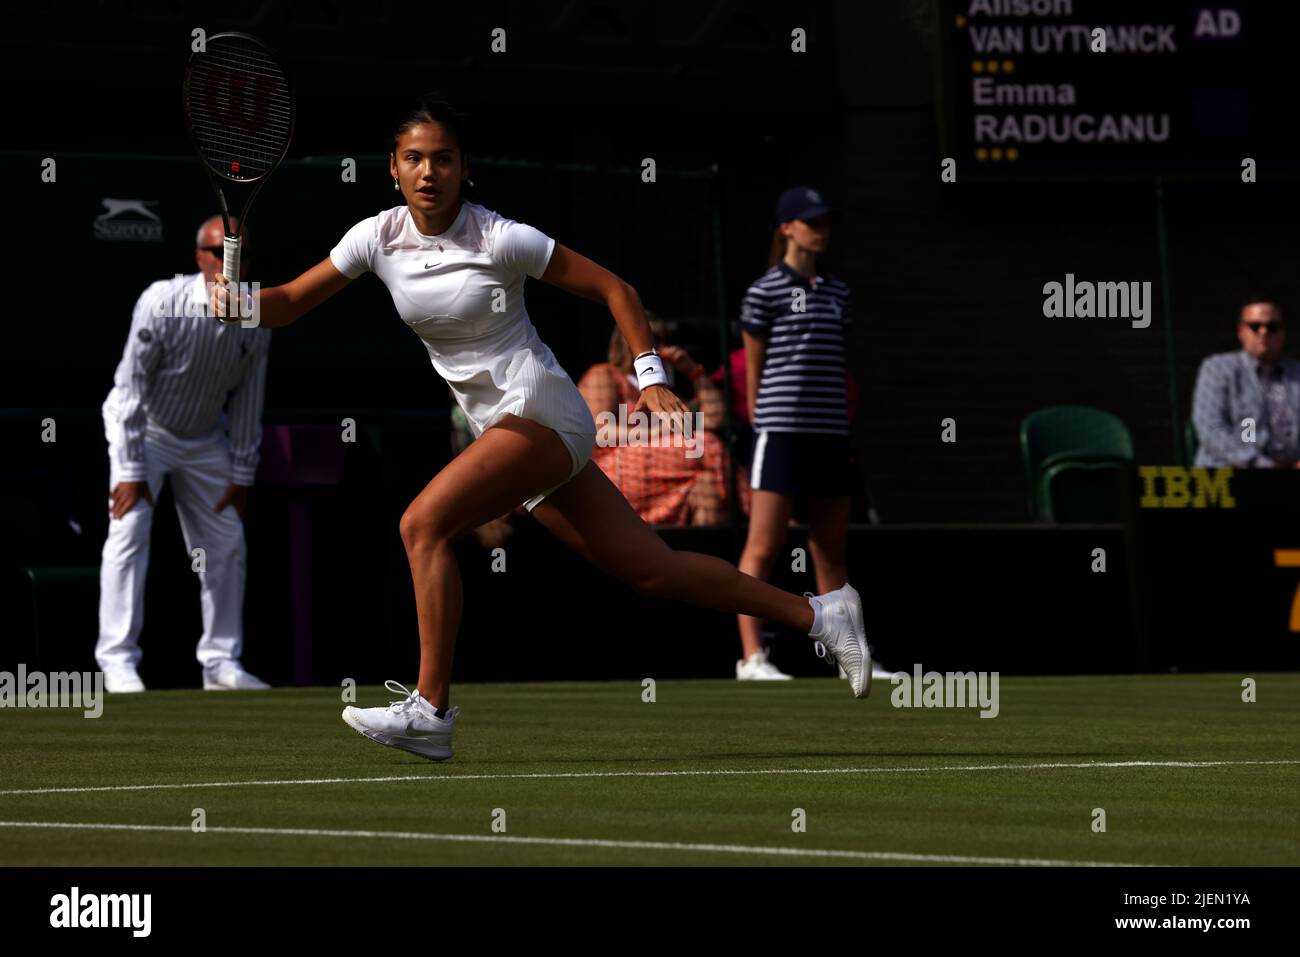 London, 27 June 2022 - Great Britain's Emma Raducanu in action during her opening round match against Alison Van Uytvanck on Centre Court at Wimbledon. Credit: Adam Stoltman/Alamy Live News Stock Photo